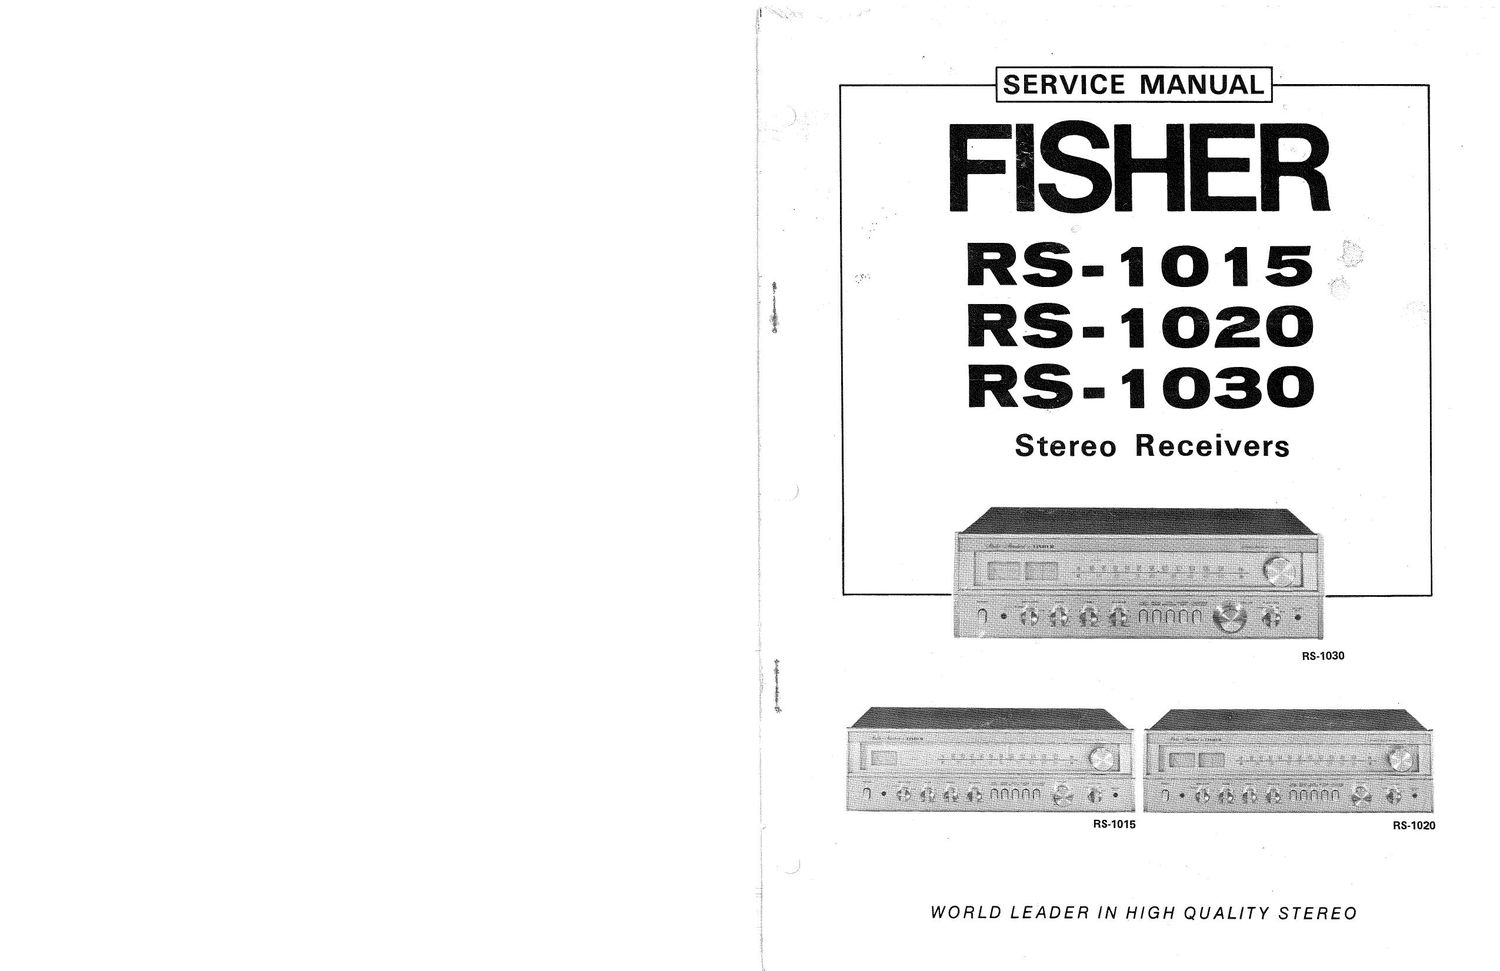 Fisher RS 1020 Service Manual